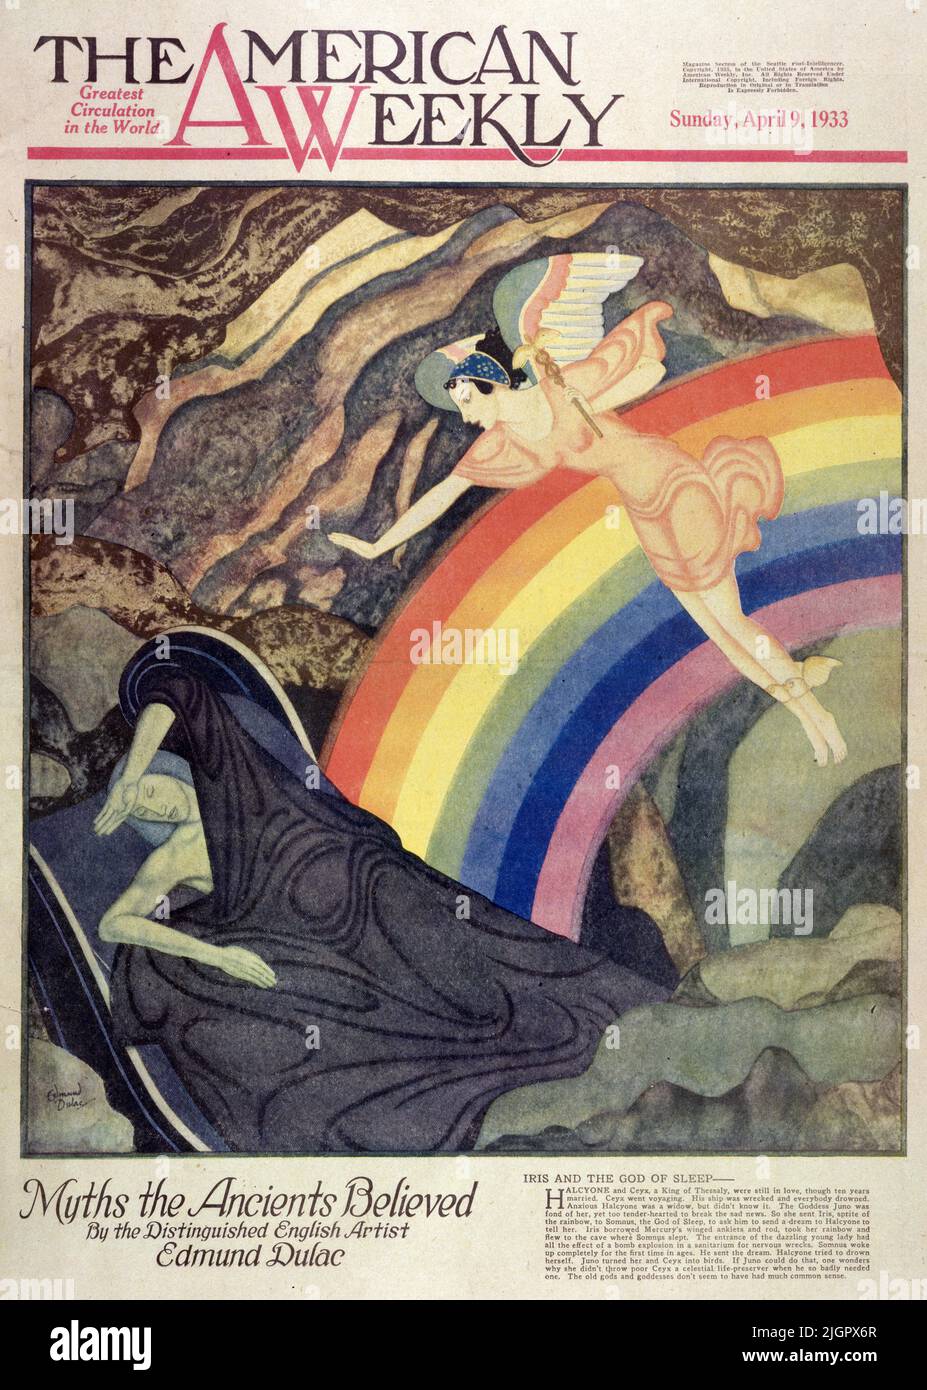 Iris and The God of Sleep published April 9,1933 in the American Weekly magazine painted by Edmund Dulac. Halcyone and Ceyx, a King of Thessaly, were still in love, though ten years married. Ceyx went voyaging. His ship was wrecked and everybody drowned. Anxious Halcyone was a widow and didn’t know it.  The Goddess Juno was fond of her, yet too tender-hearted to break the sad news. So she sent Iris, sprite of the rainbow, to Somnus, the God of sleep, to ask him to send a dream to Halcyone to tell her.Isis borrowed Mercury’s winged anklet and rod, took her rainbow and flew to the cave where ... Stock Photo